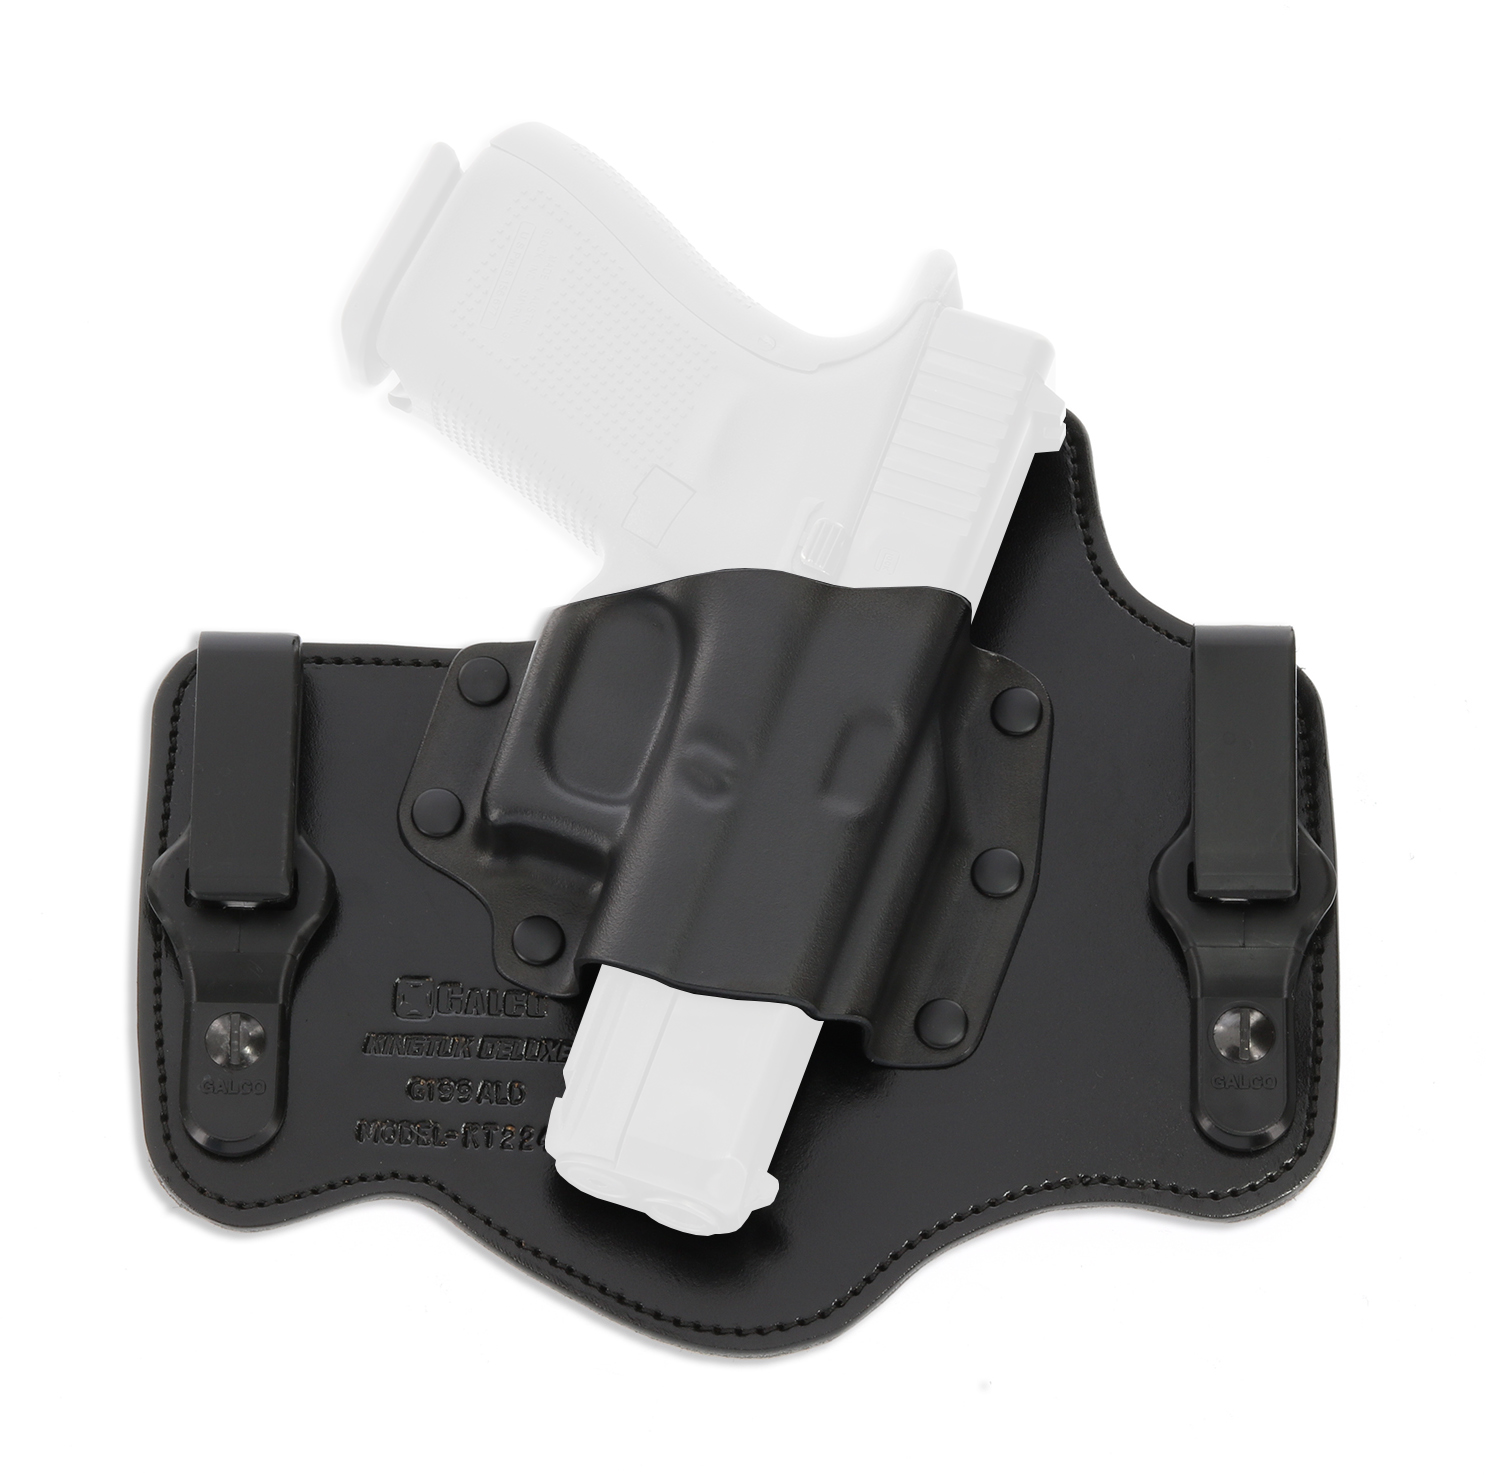 Details about   Galco Kingtuk DELUXE IWB Holster Fit Glock 17/19/26 Right Kydex & Leather KT224B 